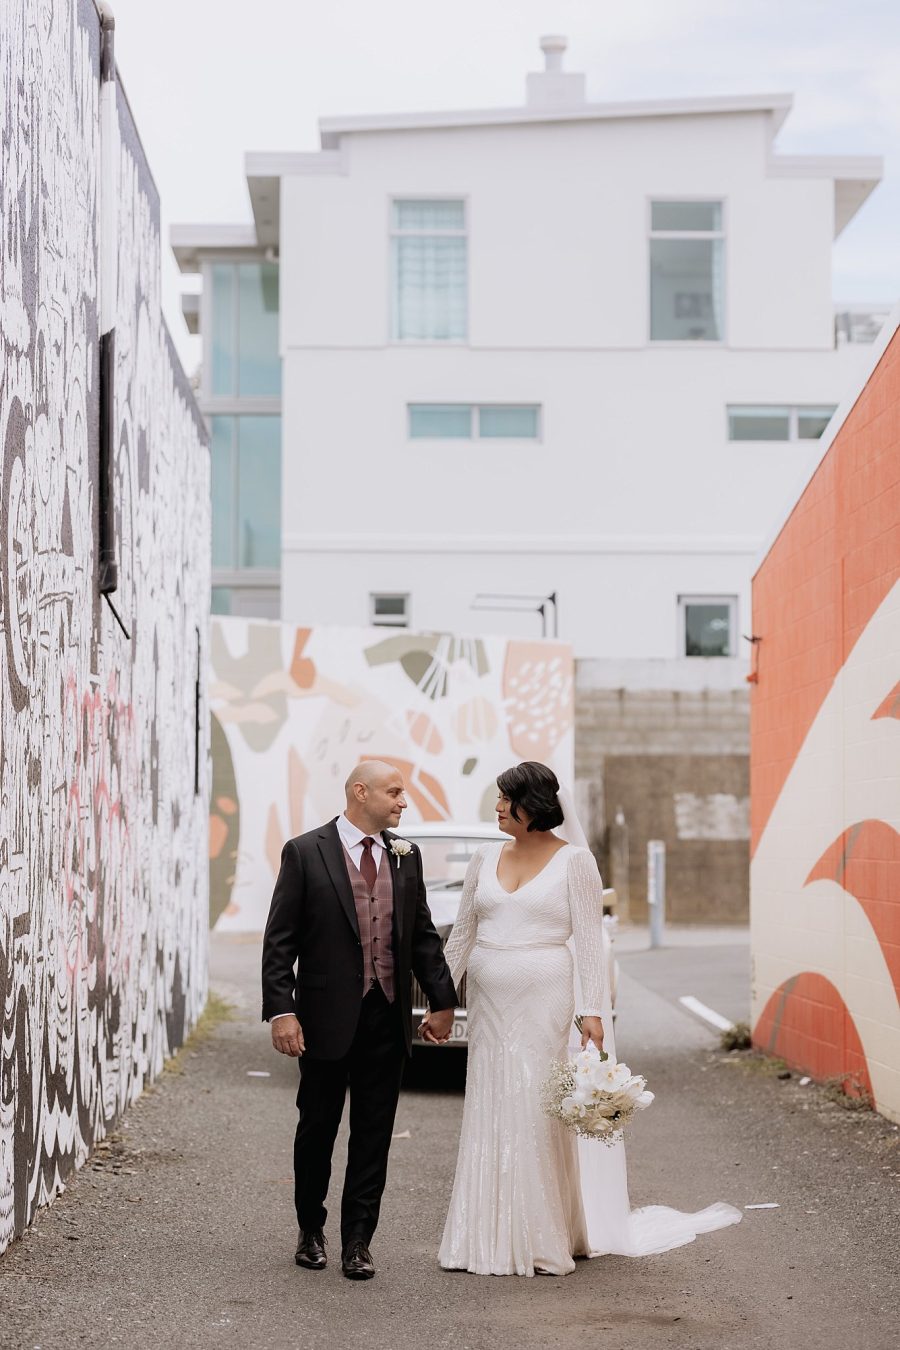 Wedding couple holding hands in front of deco mural with Rolls Royce behind them